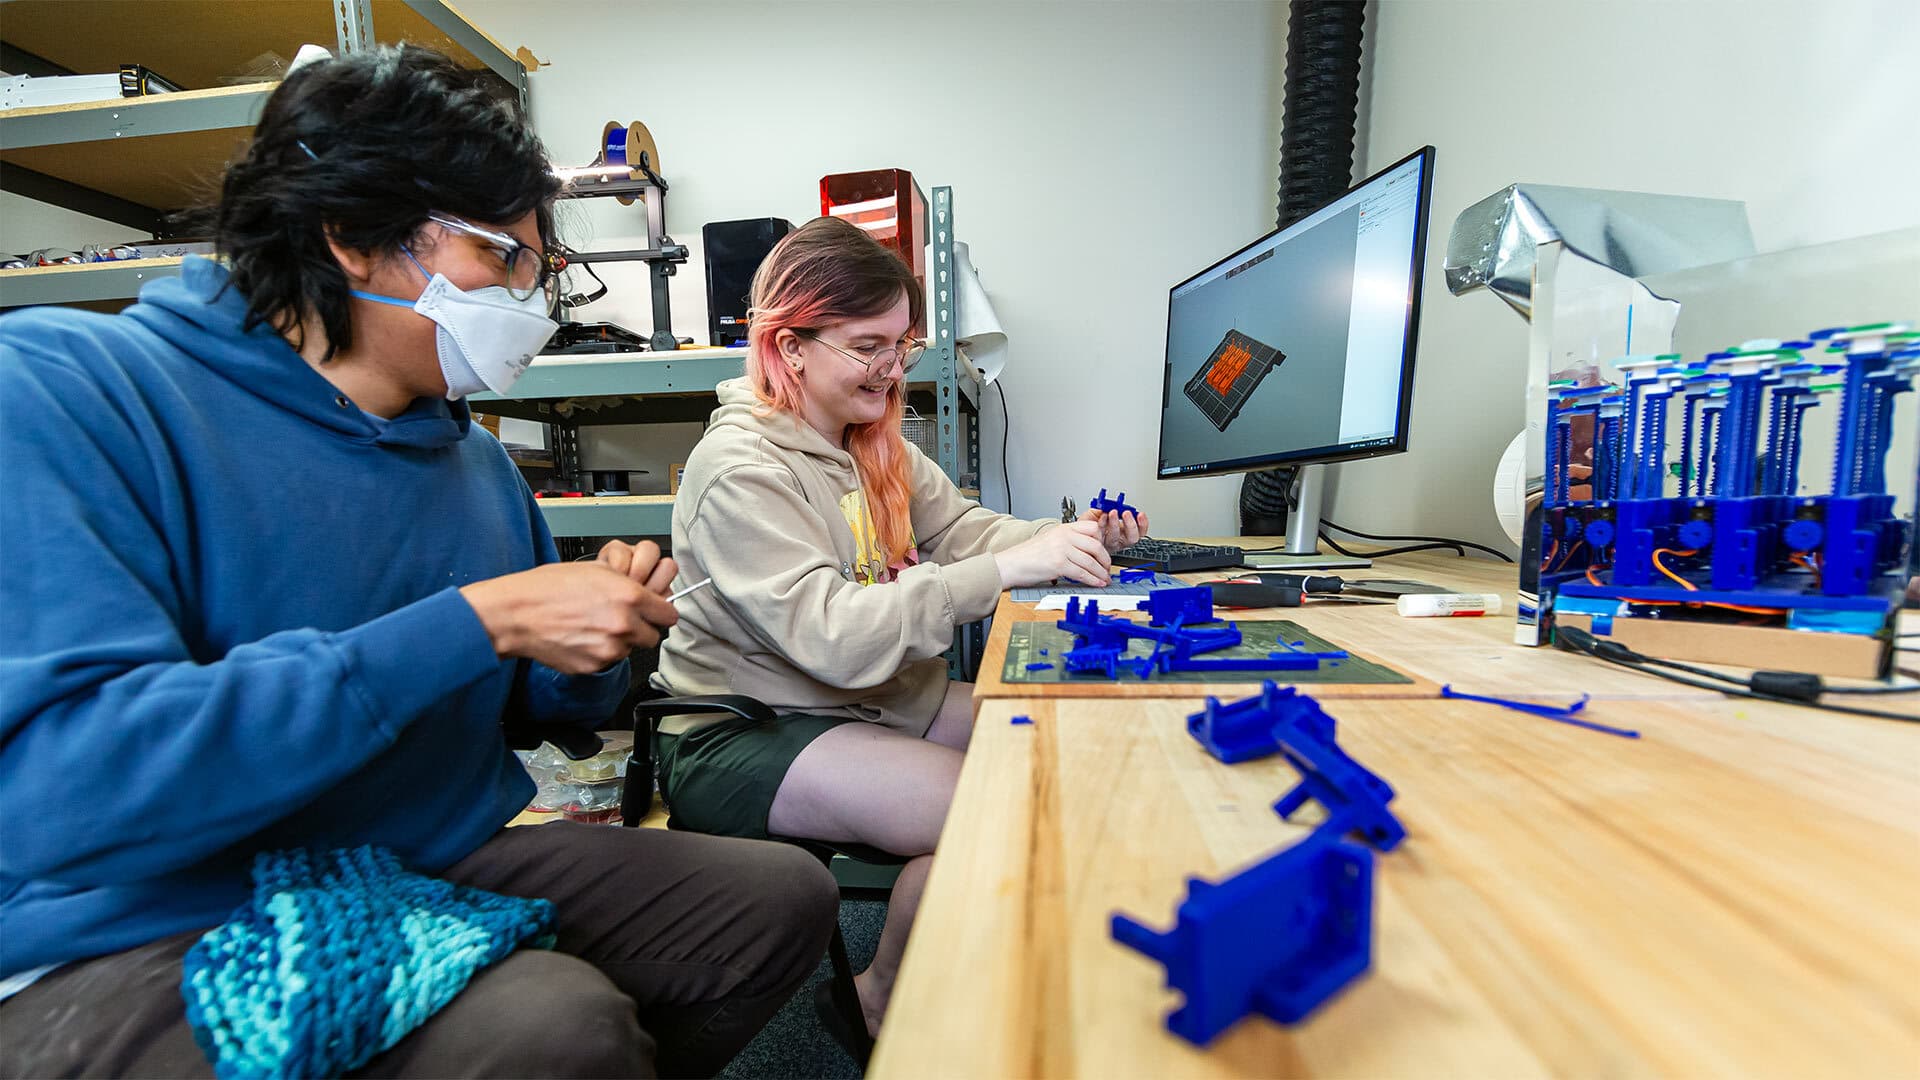 two students sit at a desk and work on blue 3D-printed objects